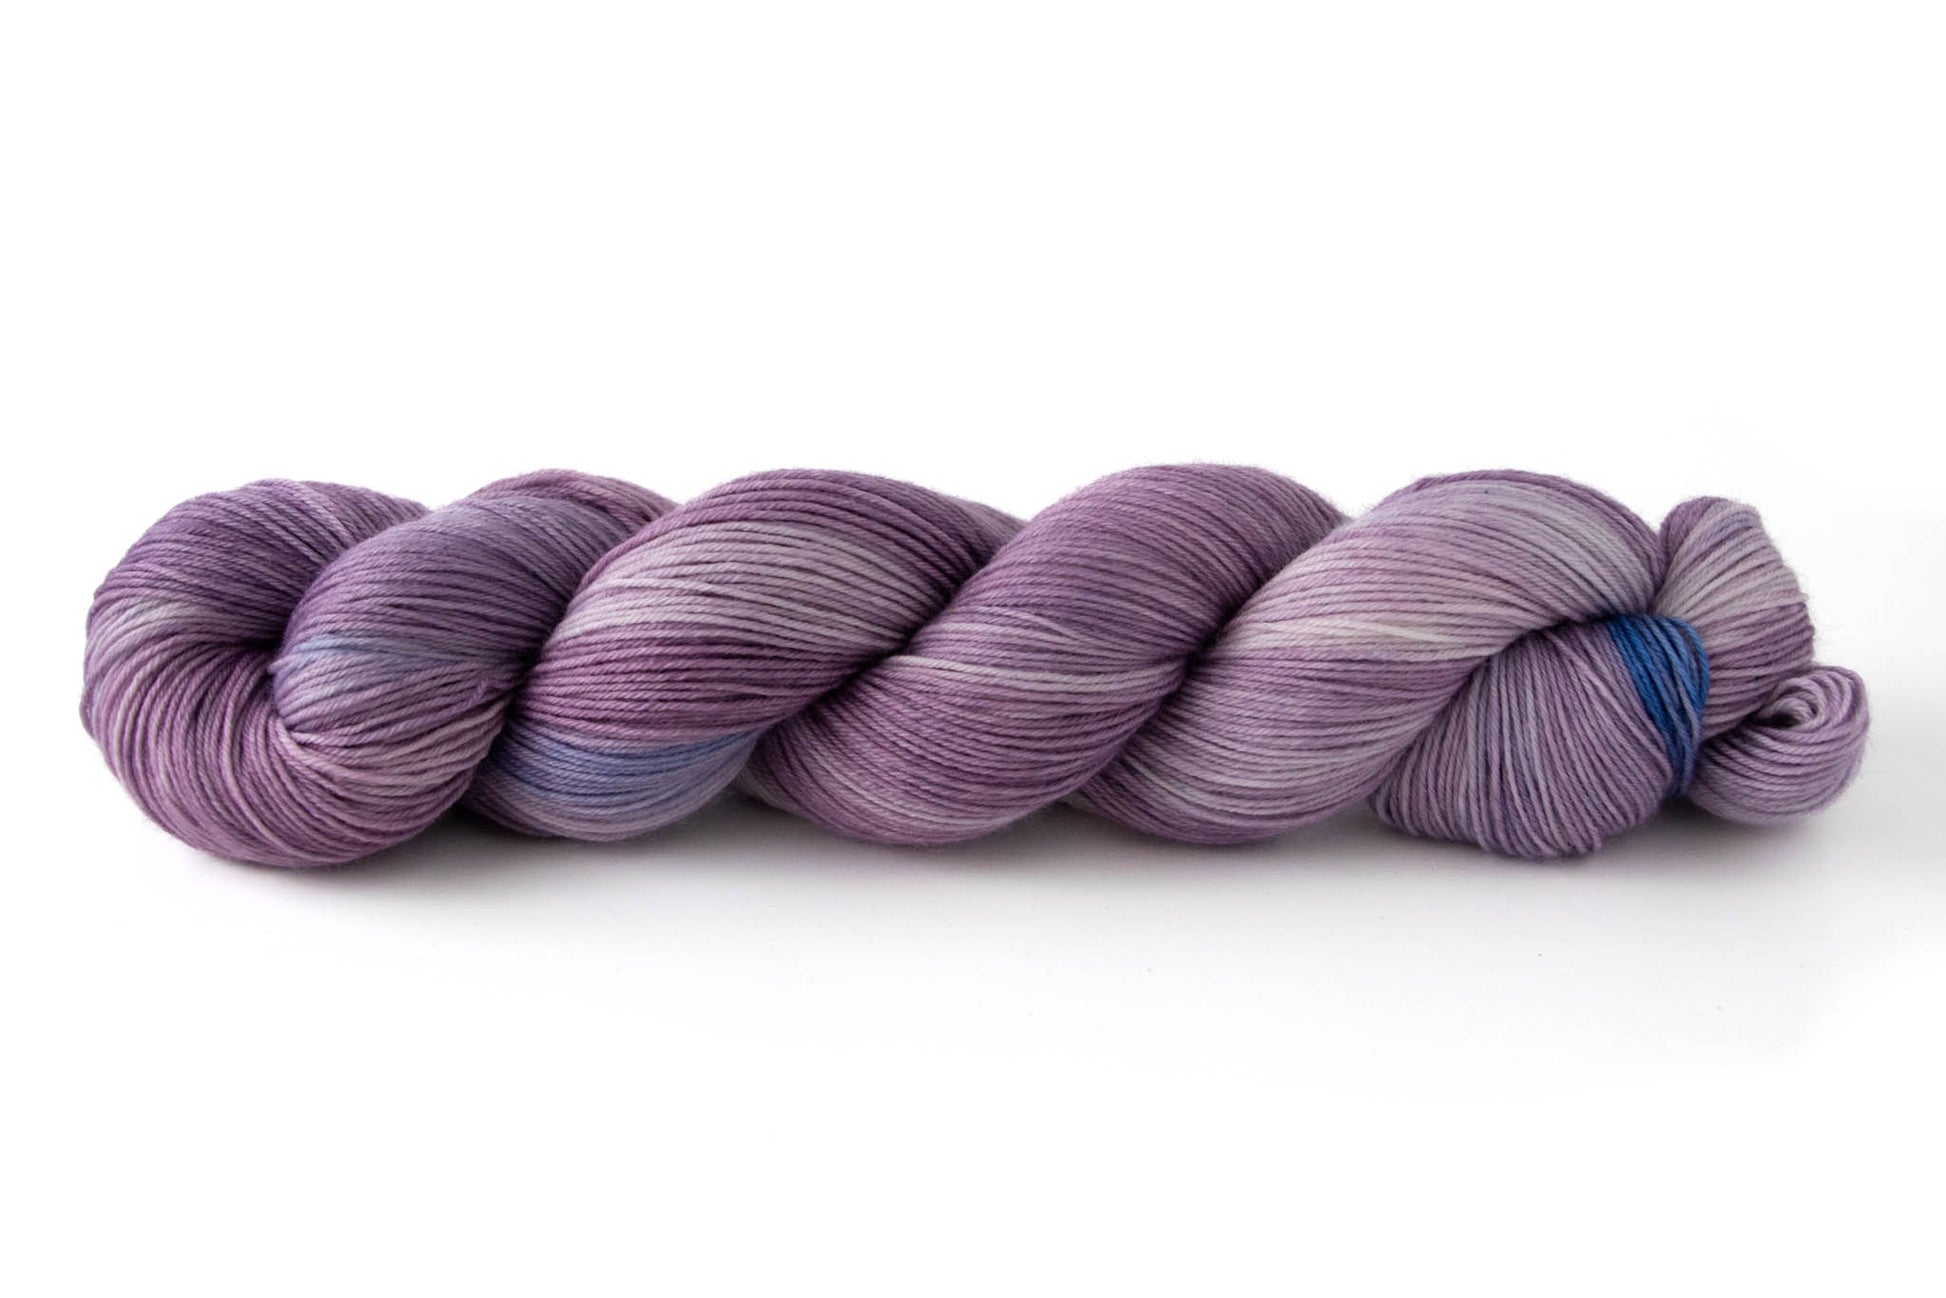 A skein of purple tonal hand-dyed wool yarn with blue highlights.